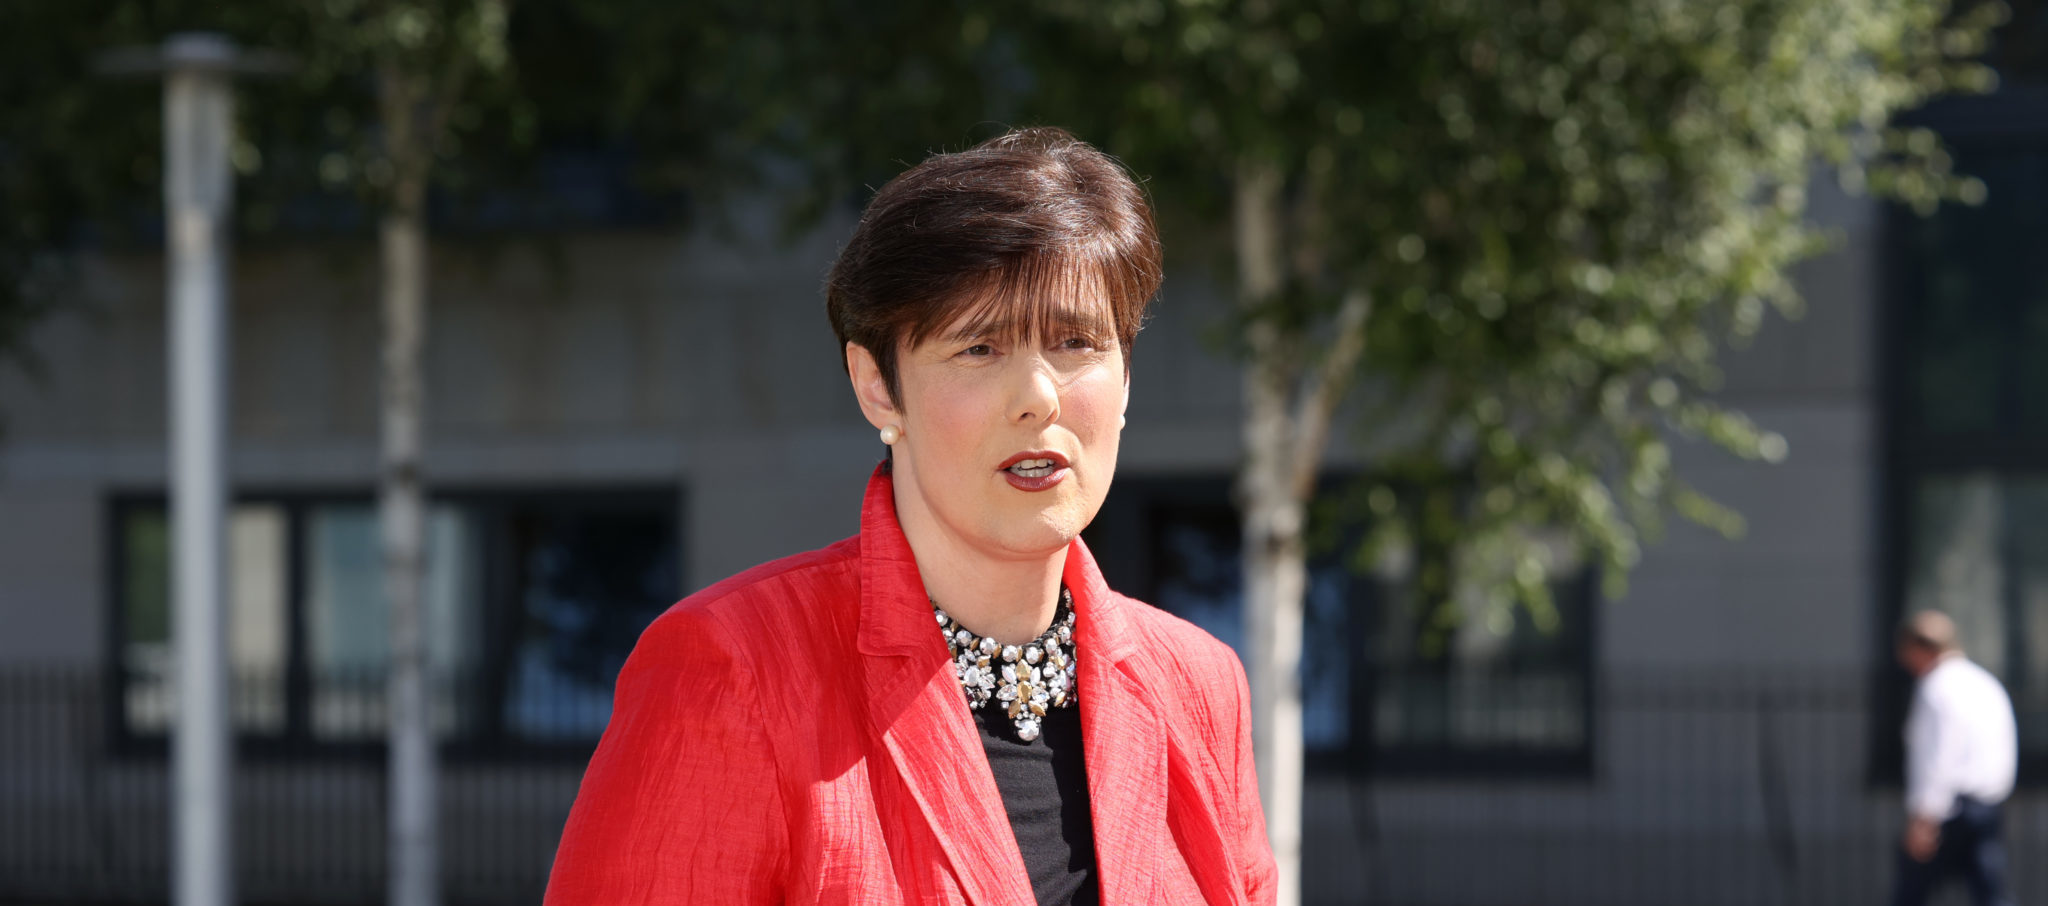 Minister for Education Norma Foley speaking to reporters outside the Department of Education in August 2021